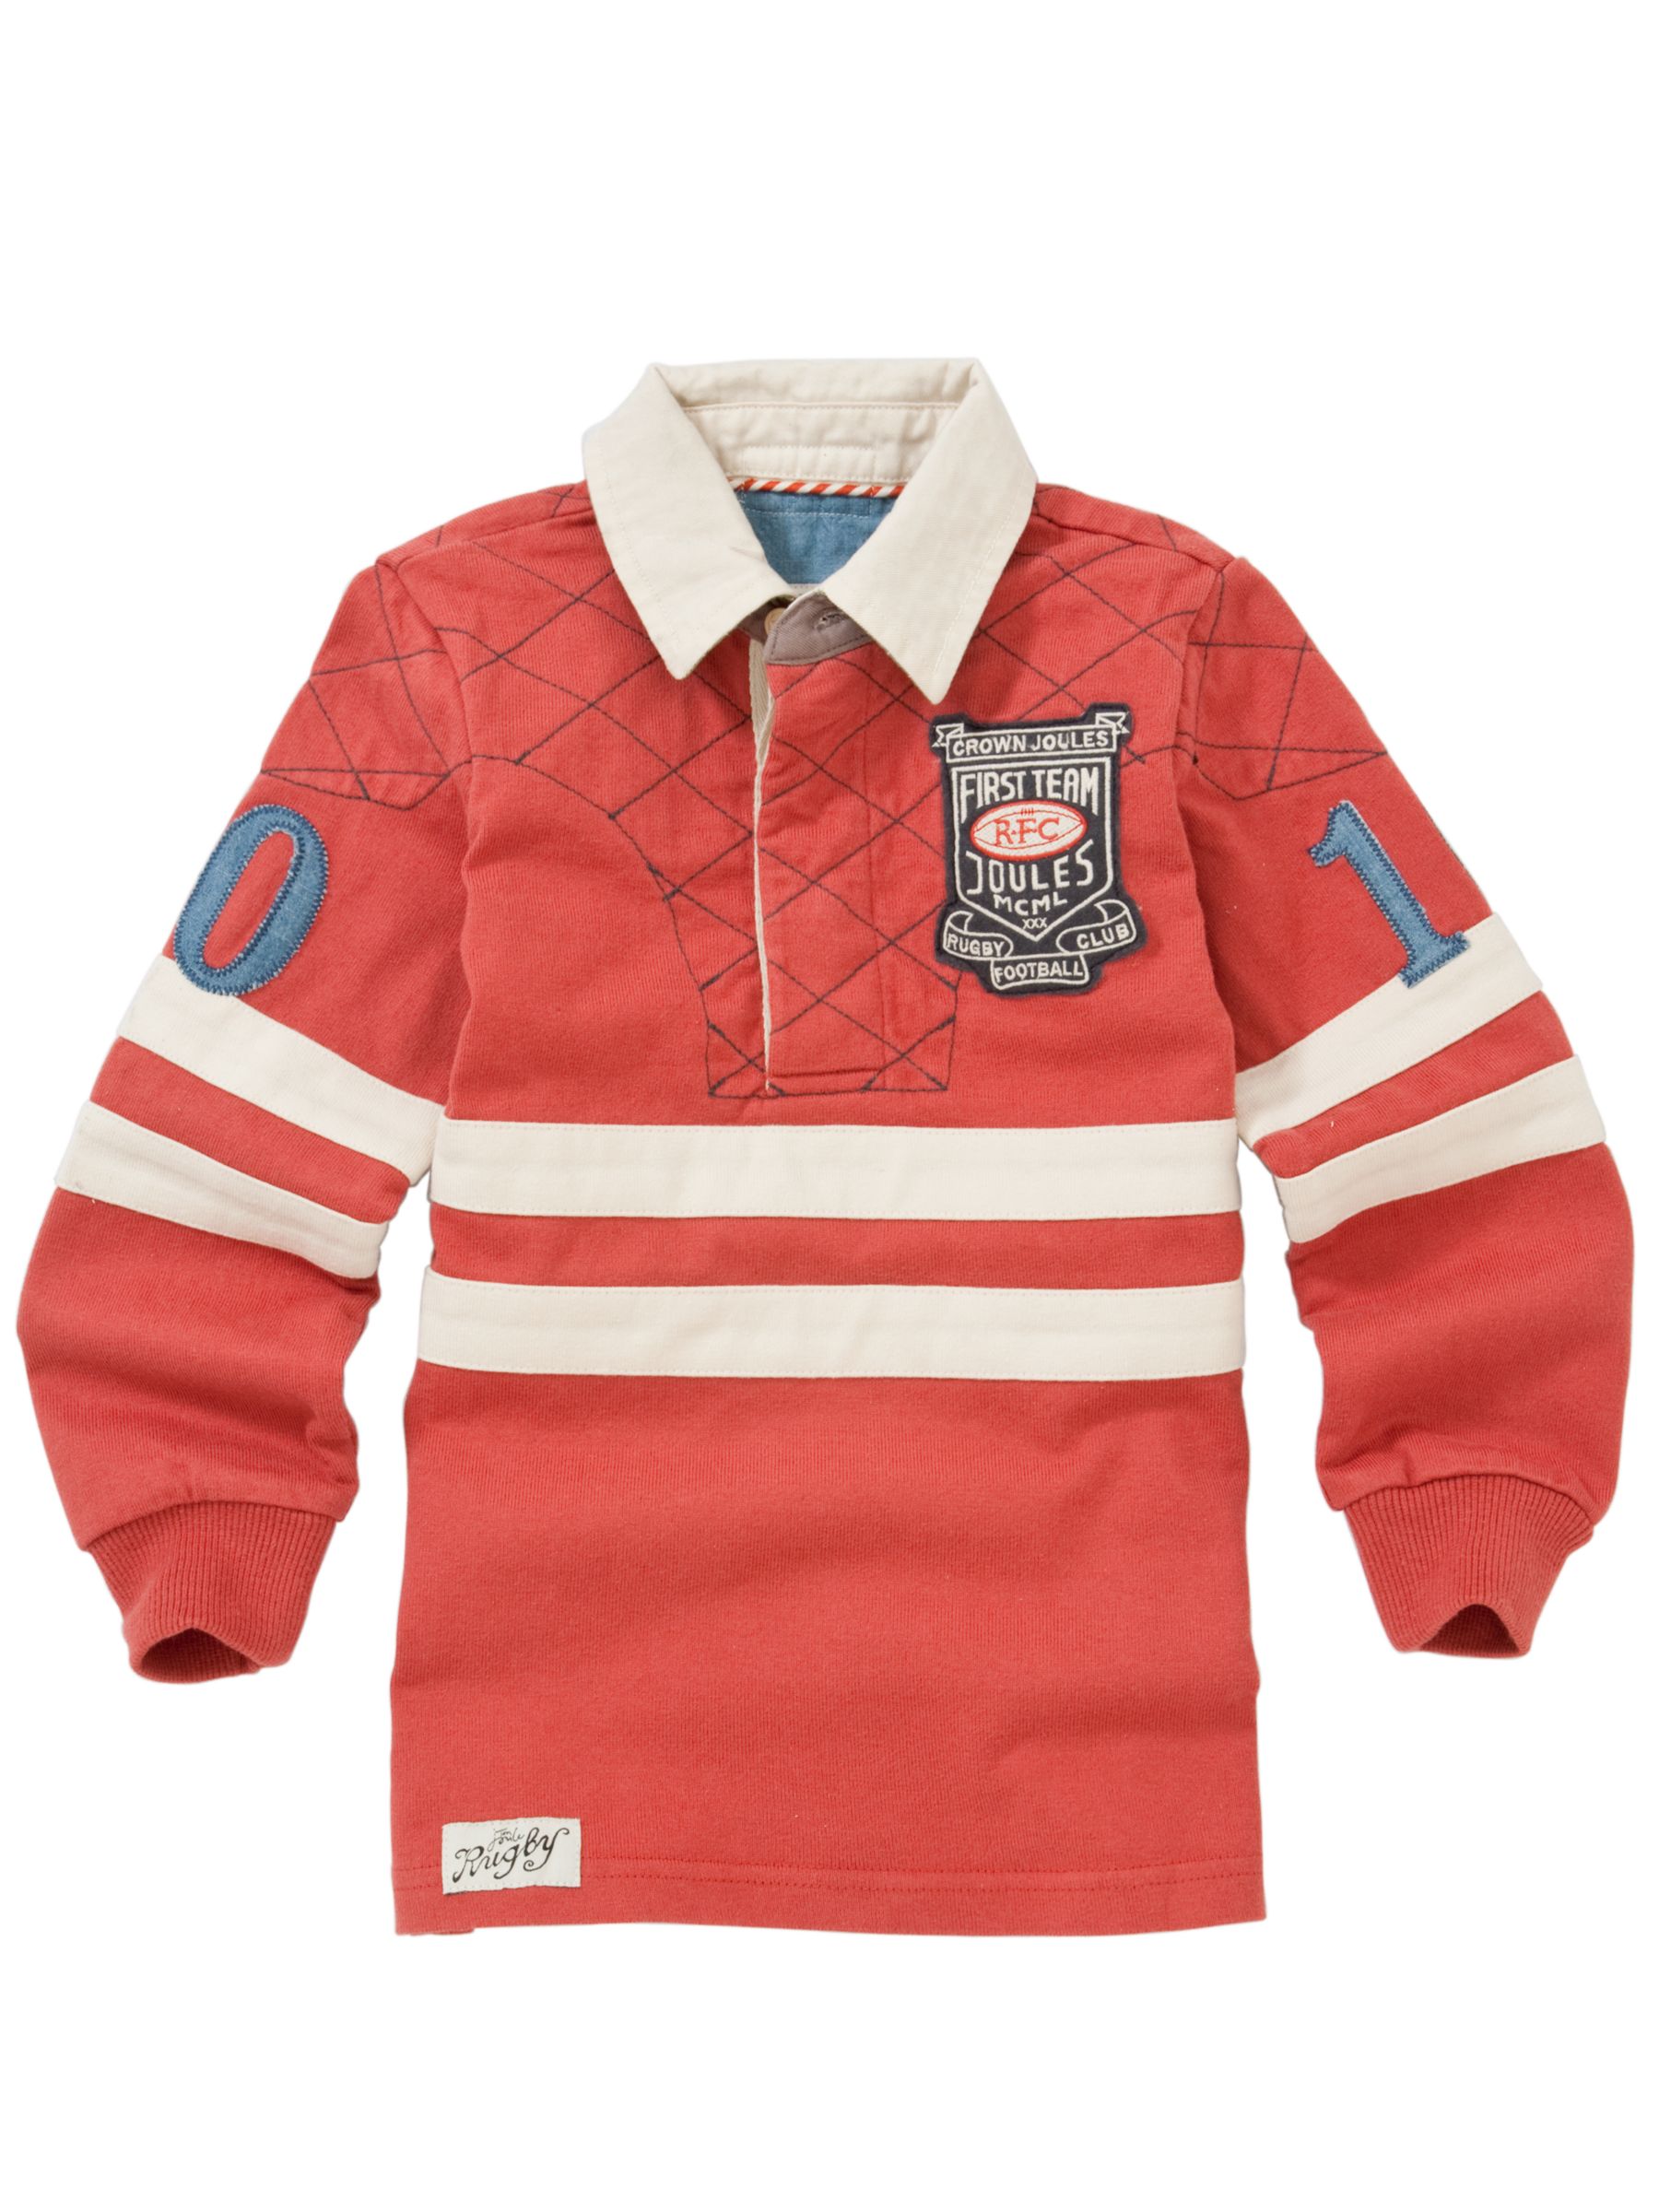 Morris Vintage Style Rugby Shirt,